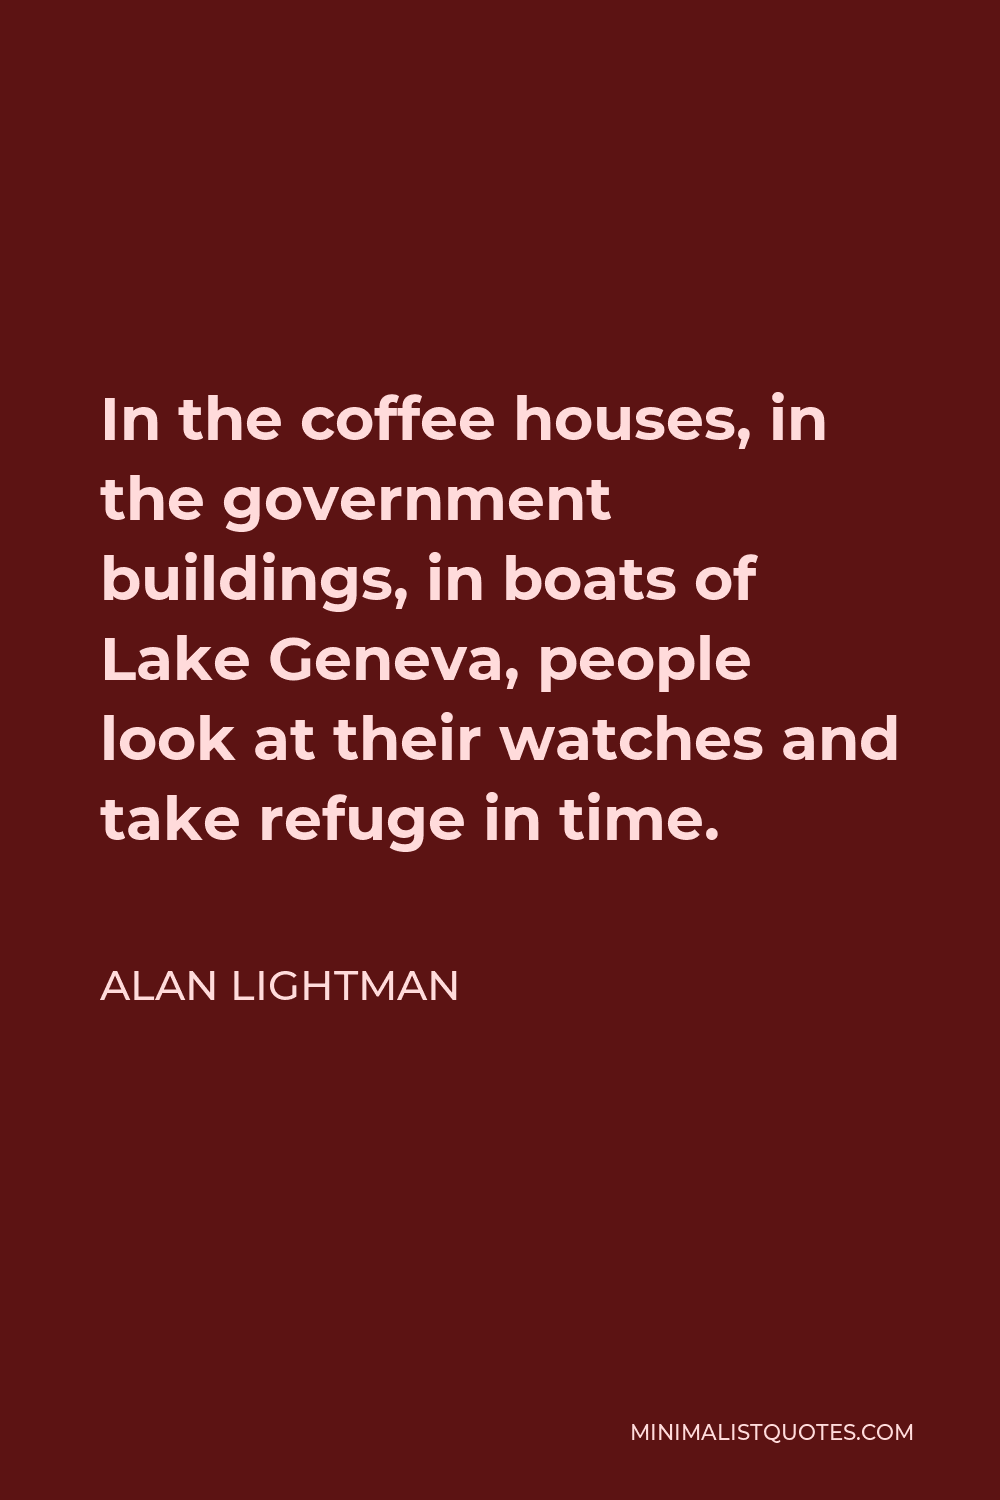 Alan Lightman Quote - In the coffee houses, in the government buildings, in boats of Lake Geneva, people look at their watches and take refuge in time.